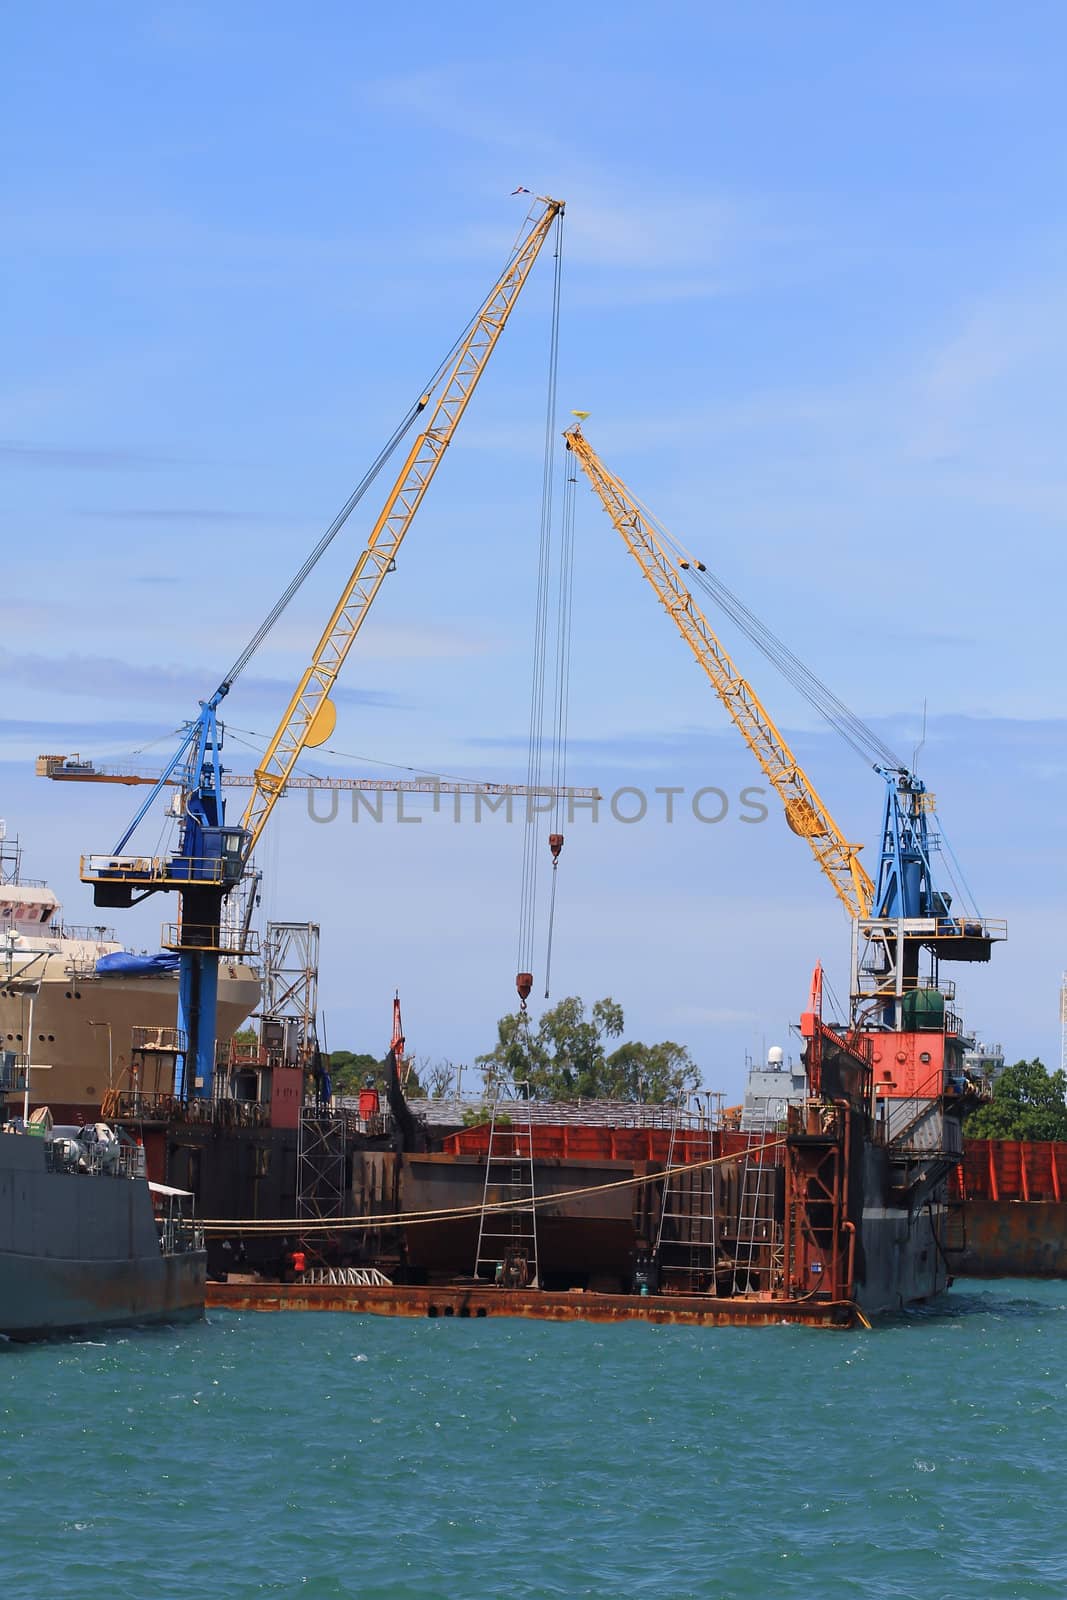 ship for repairs in large floating dry dock